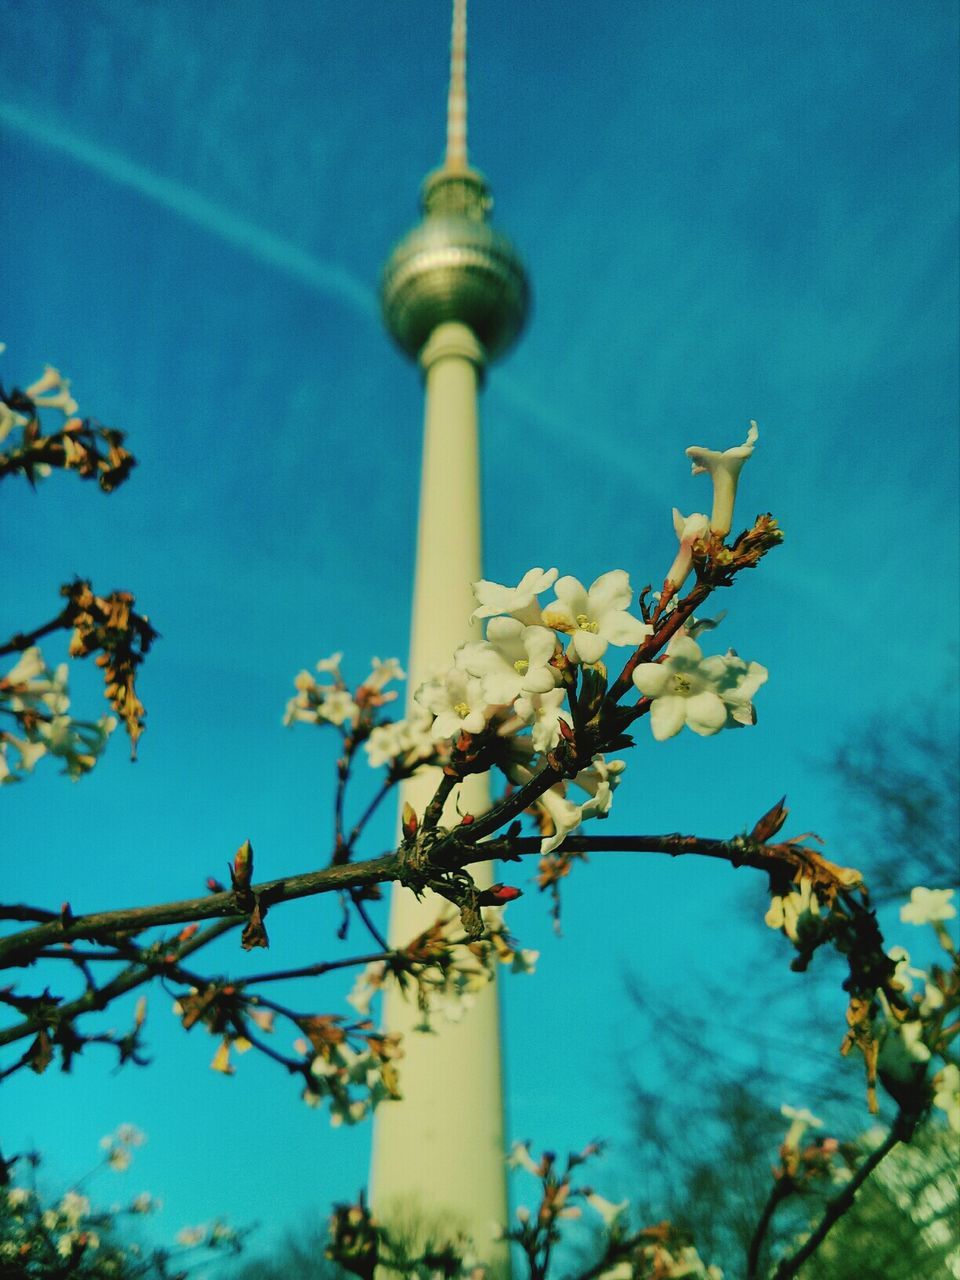 Branch with flowers against communication tower